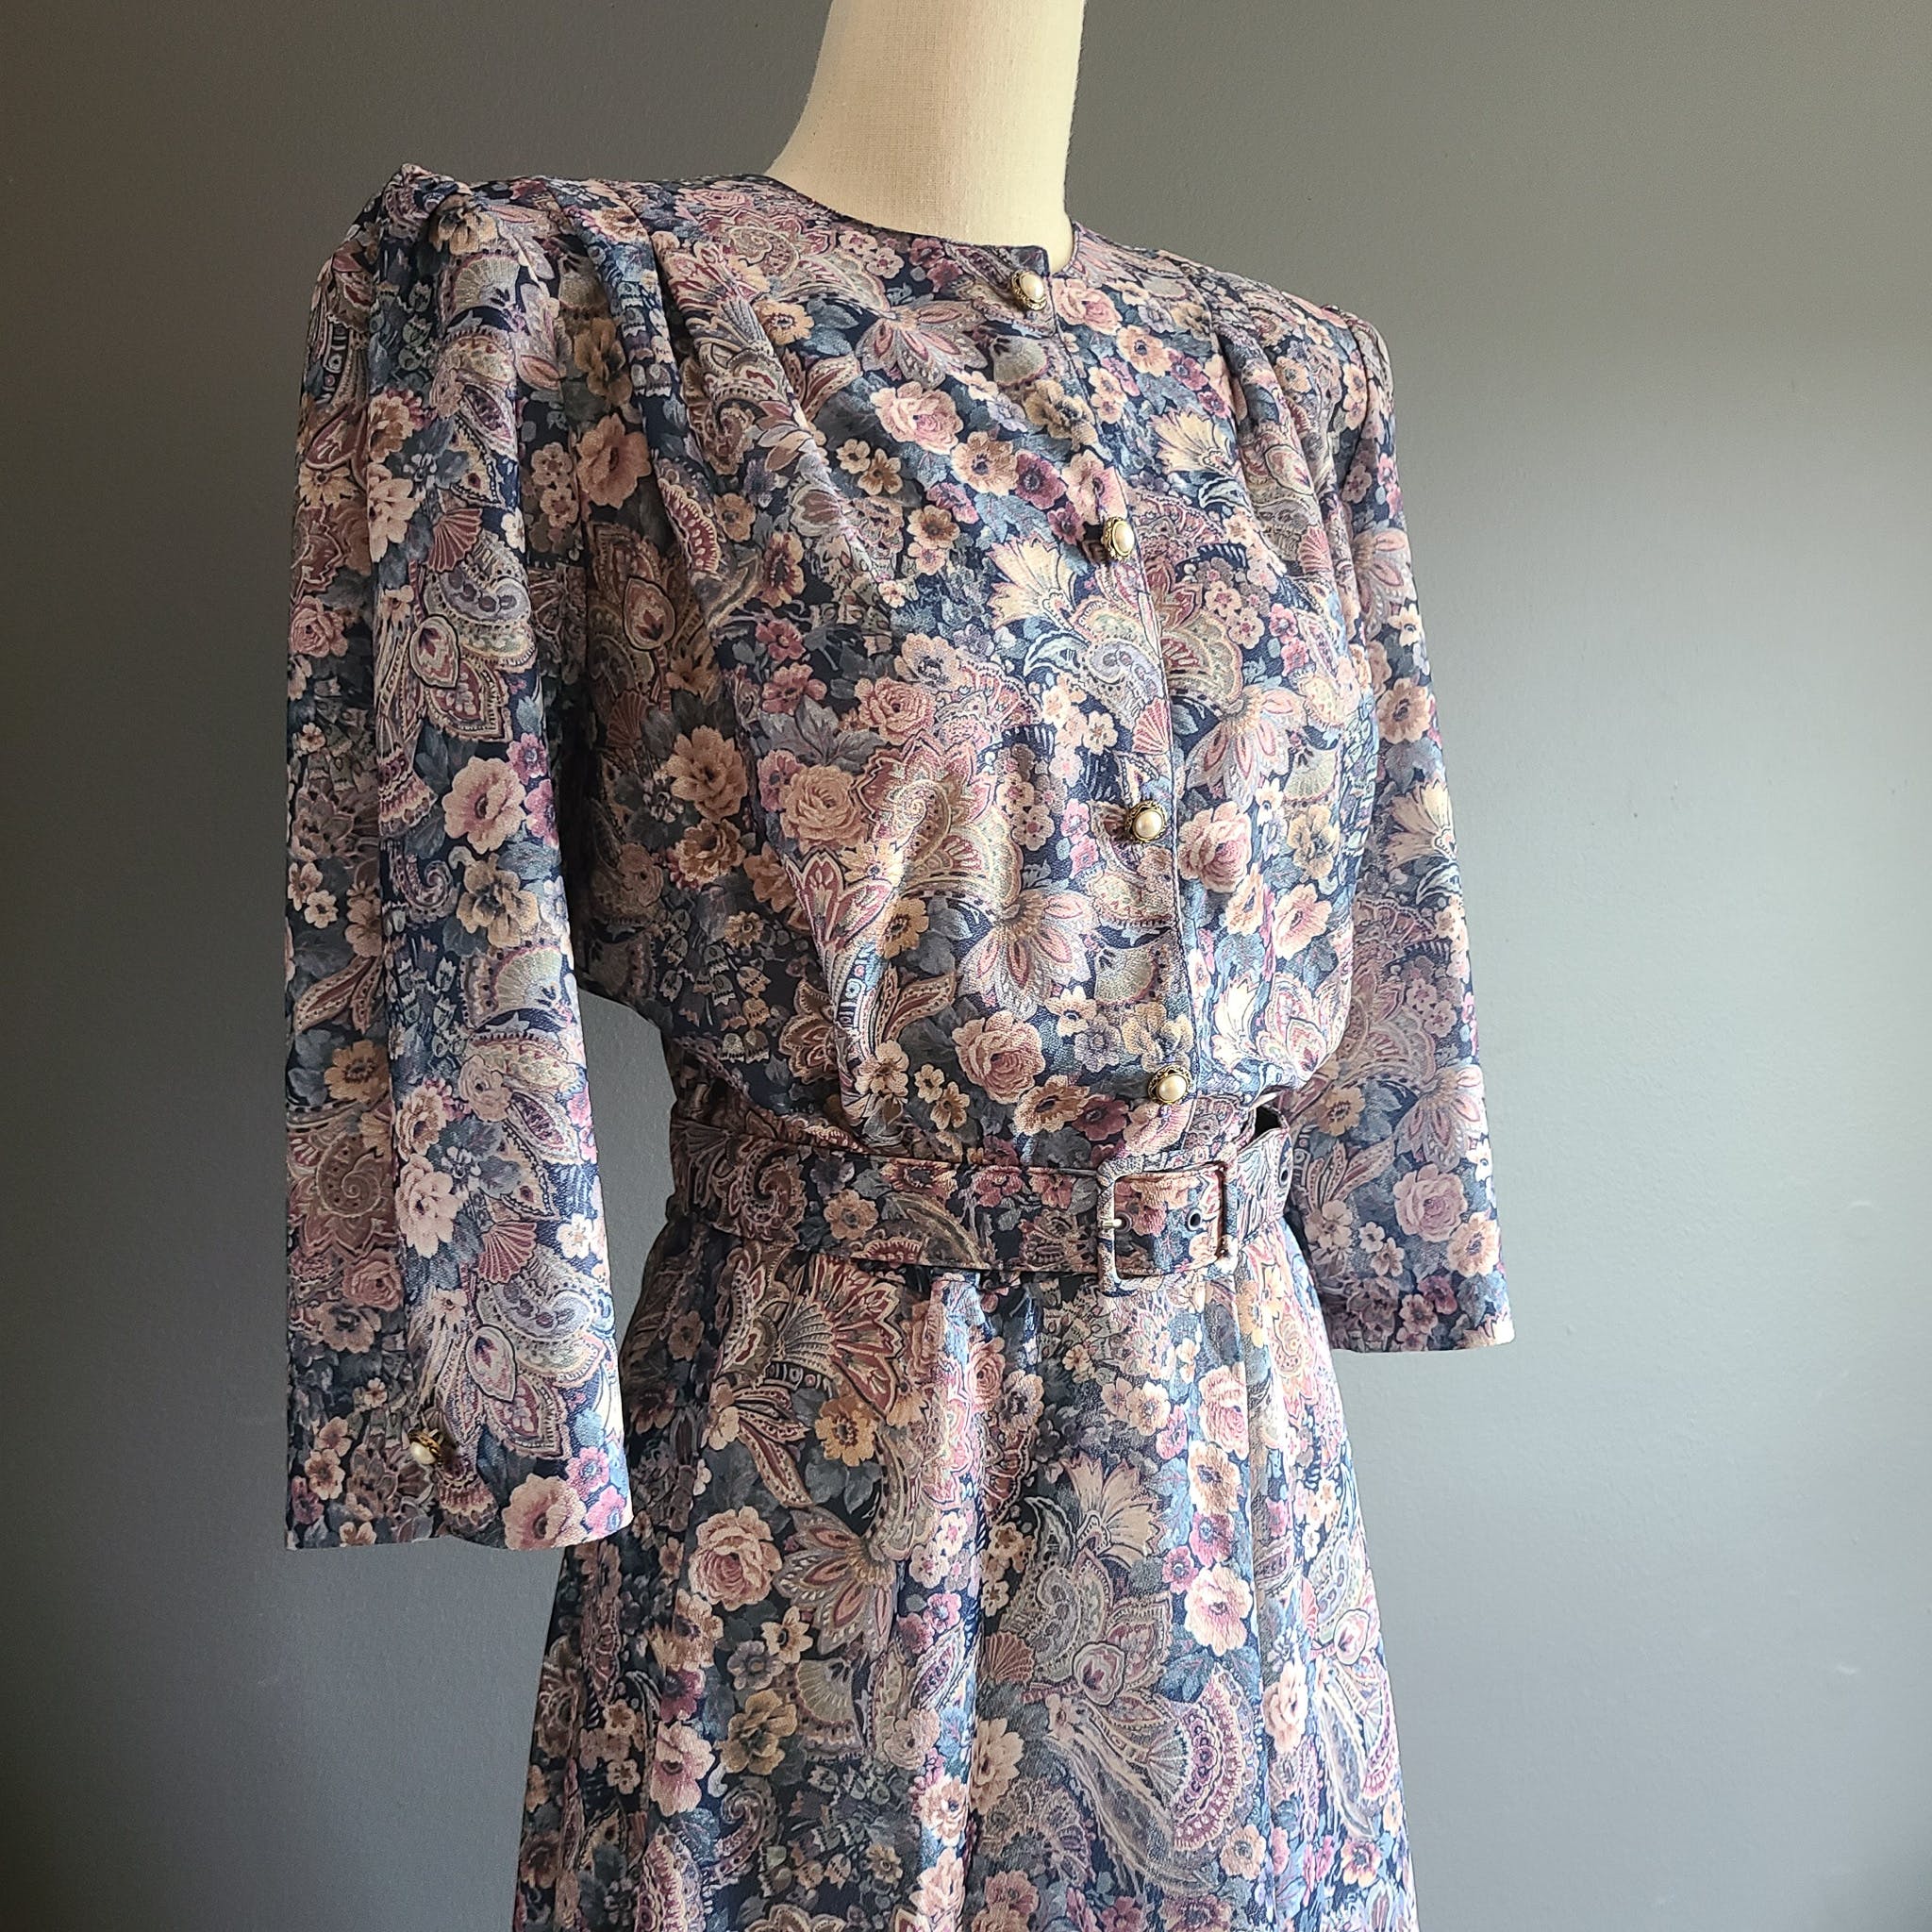 Vintage 80's Floral Paisley Polyester Midi Dress by California Looks ...